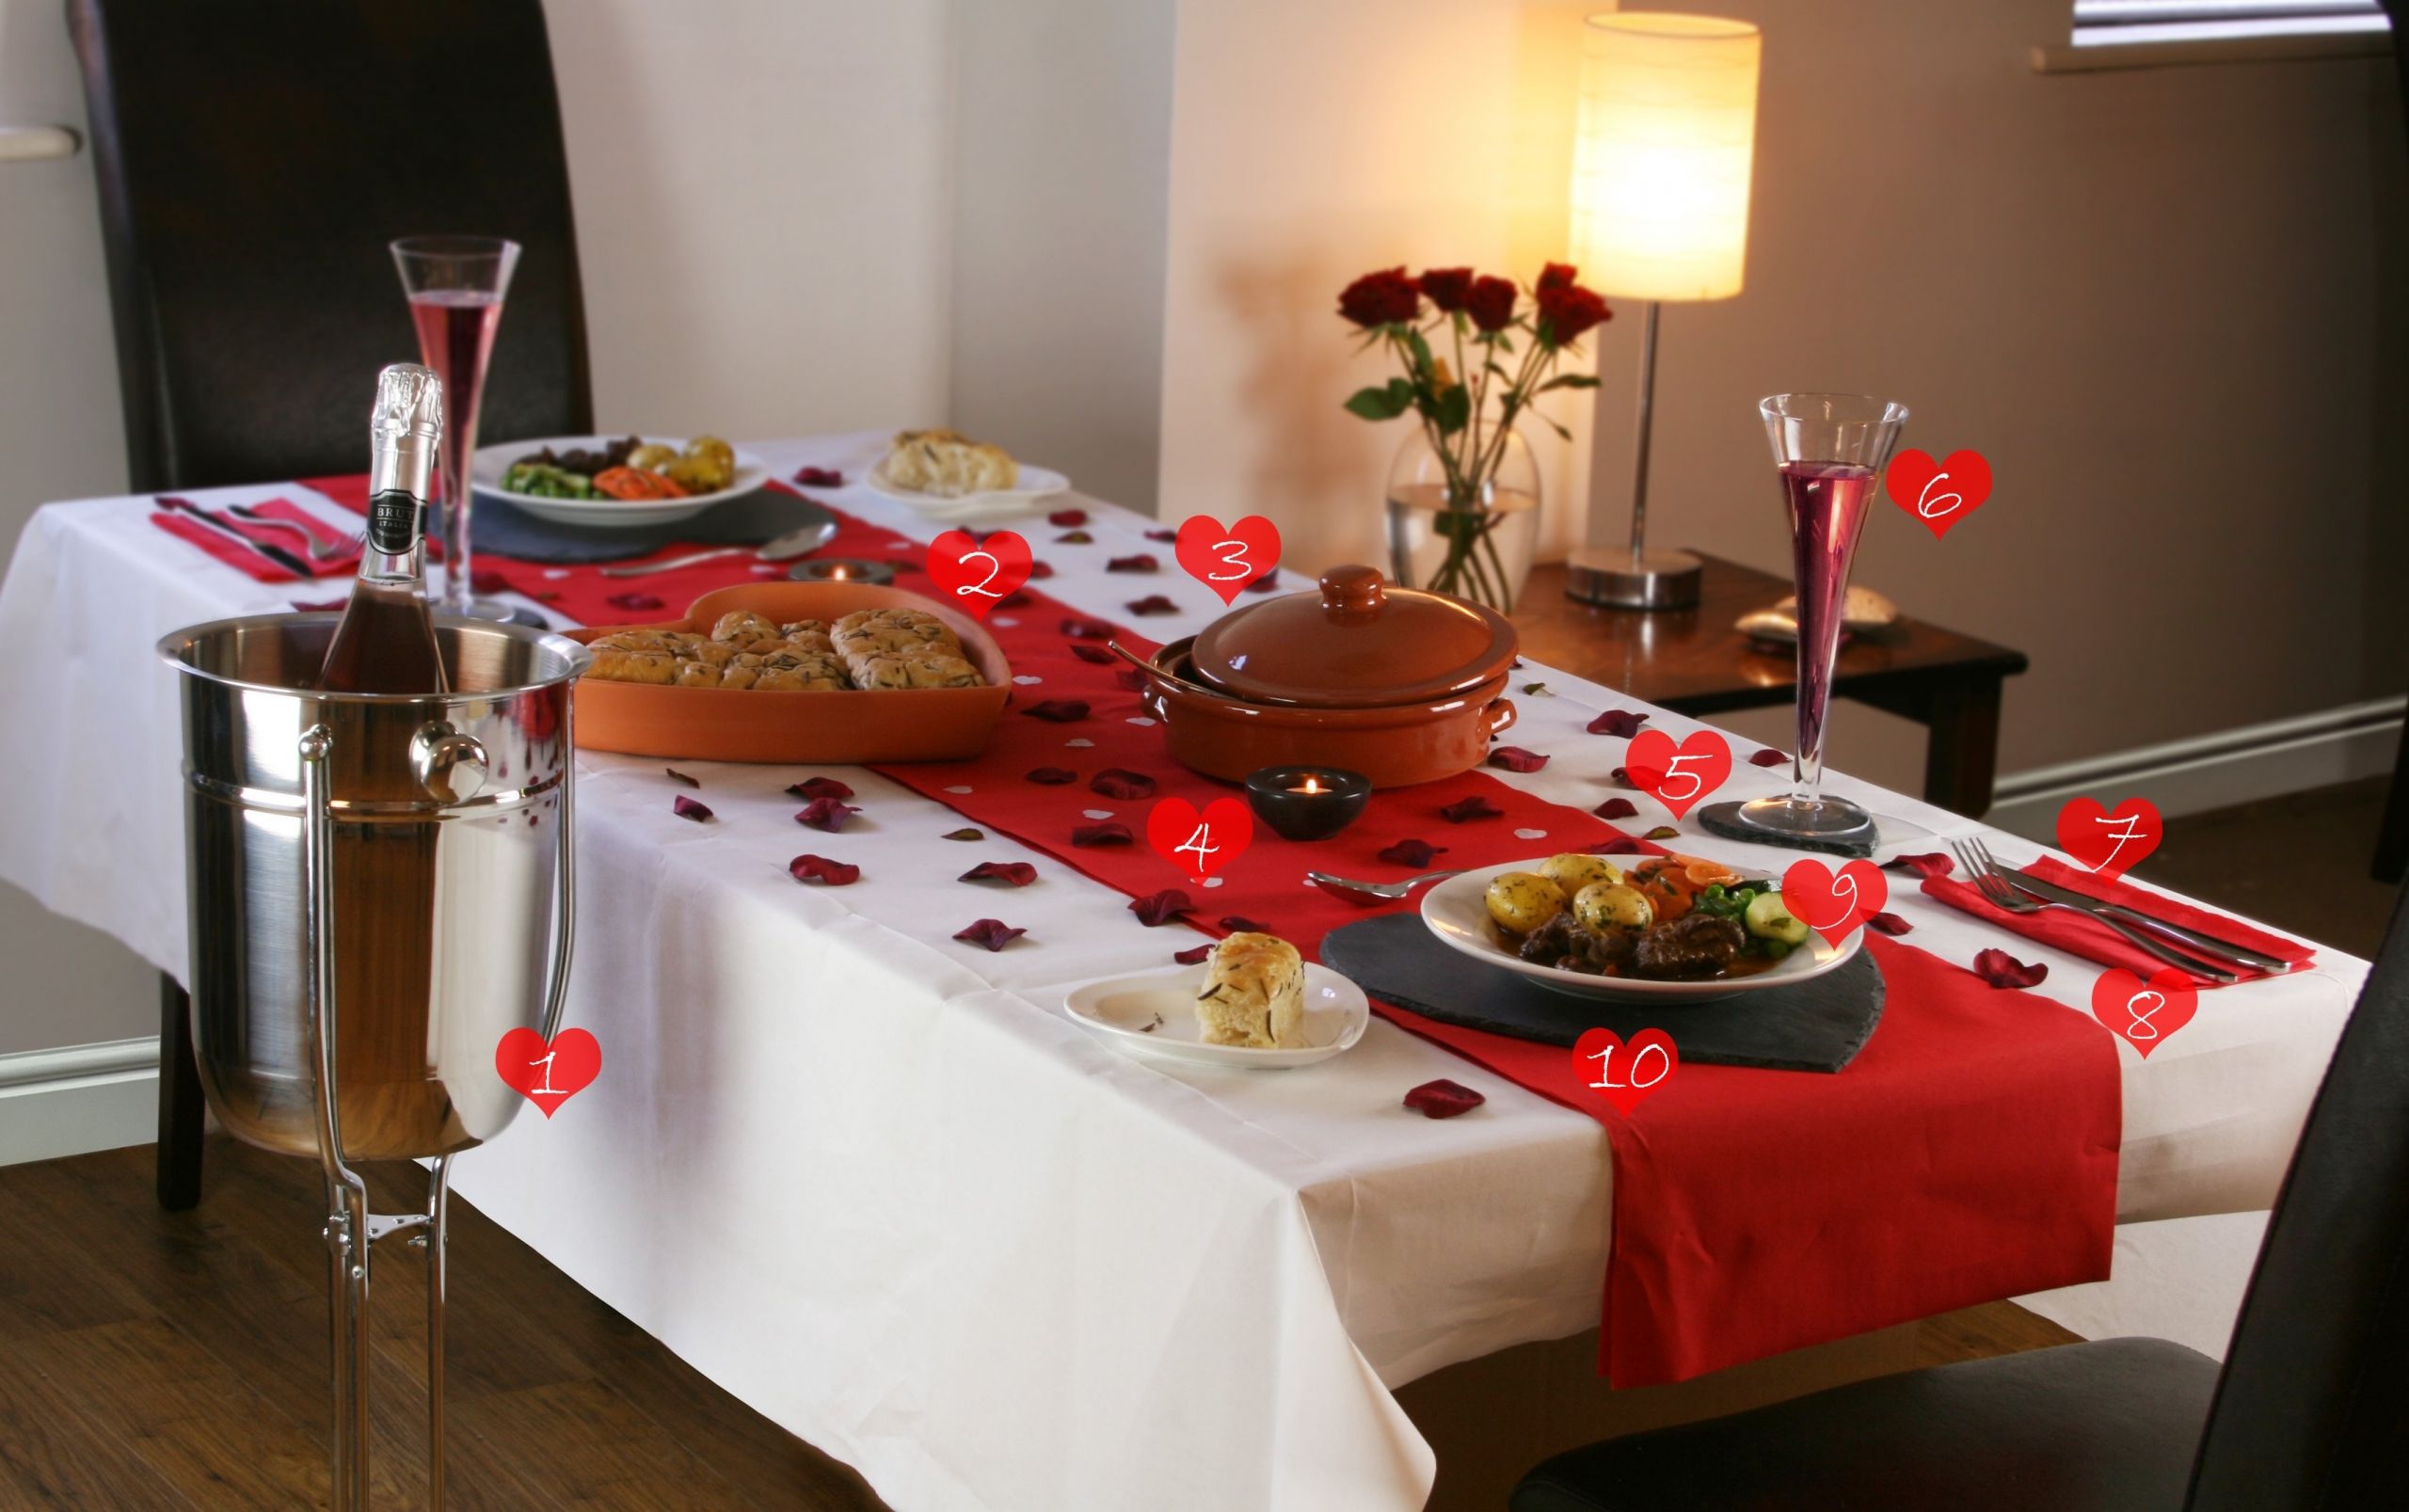 Romantic Valentines Dinners At Home
 10 Famous Romantic Dinner Ideas At Home 2020